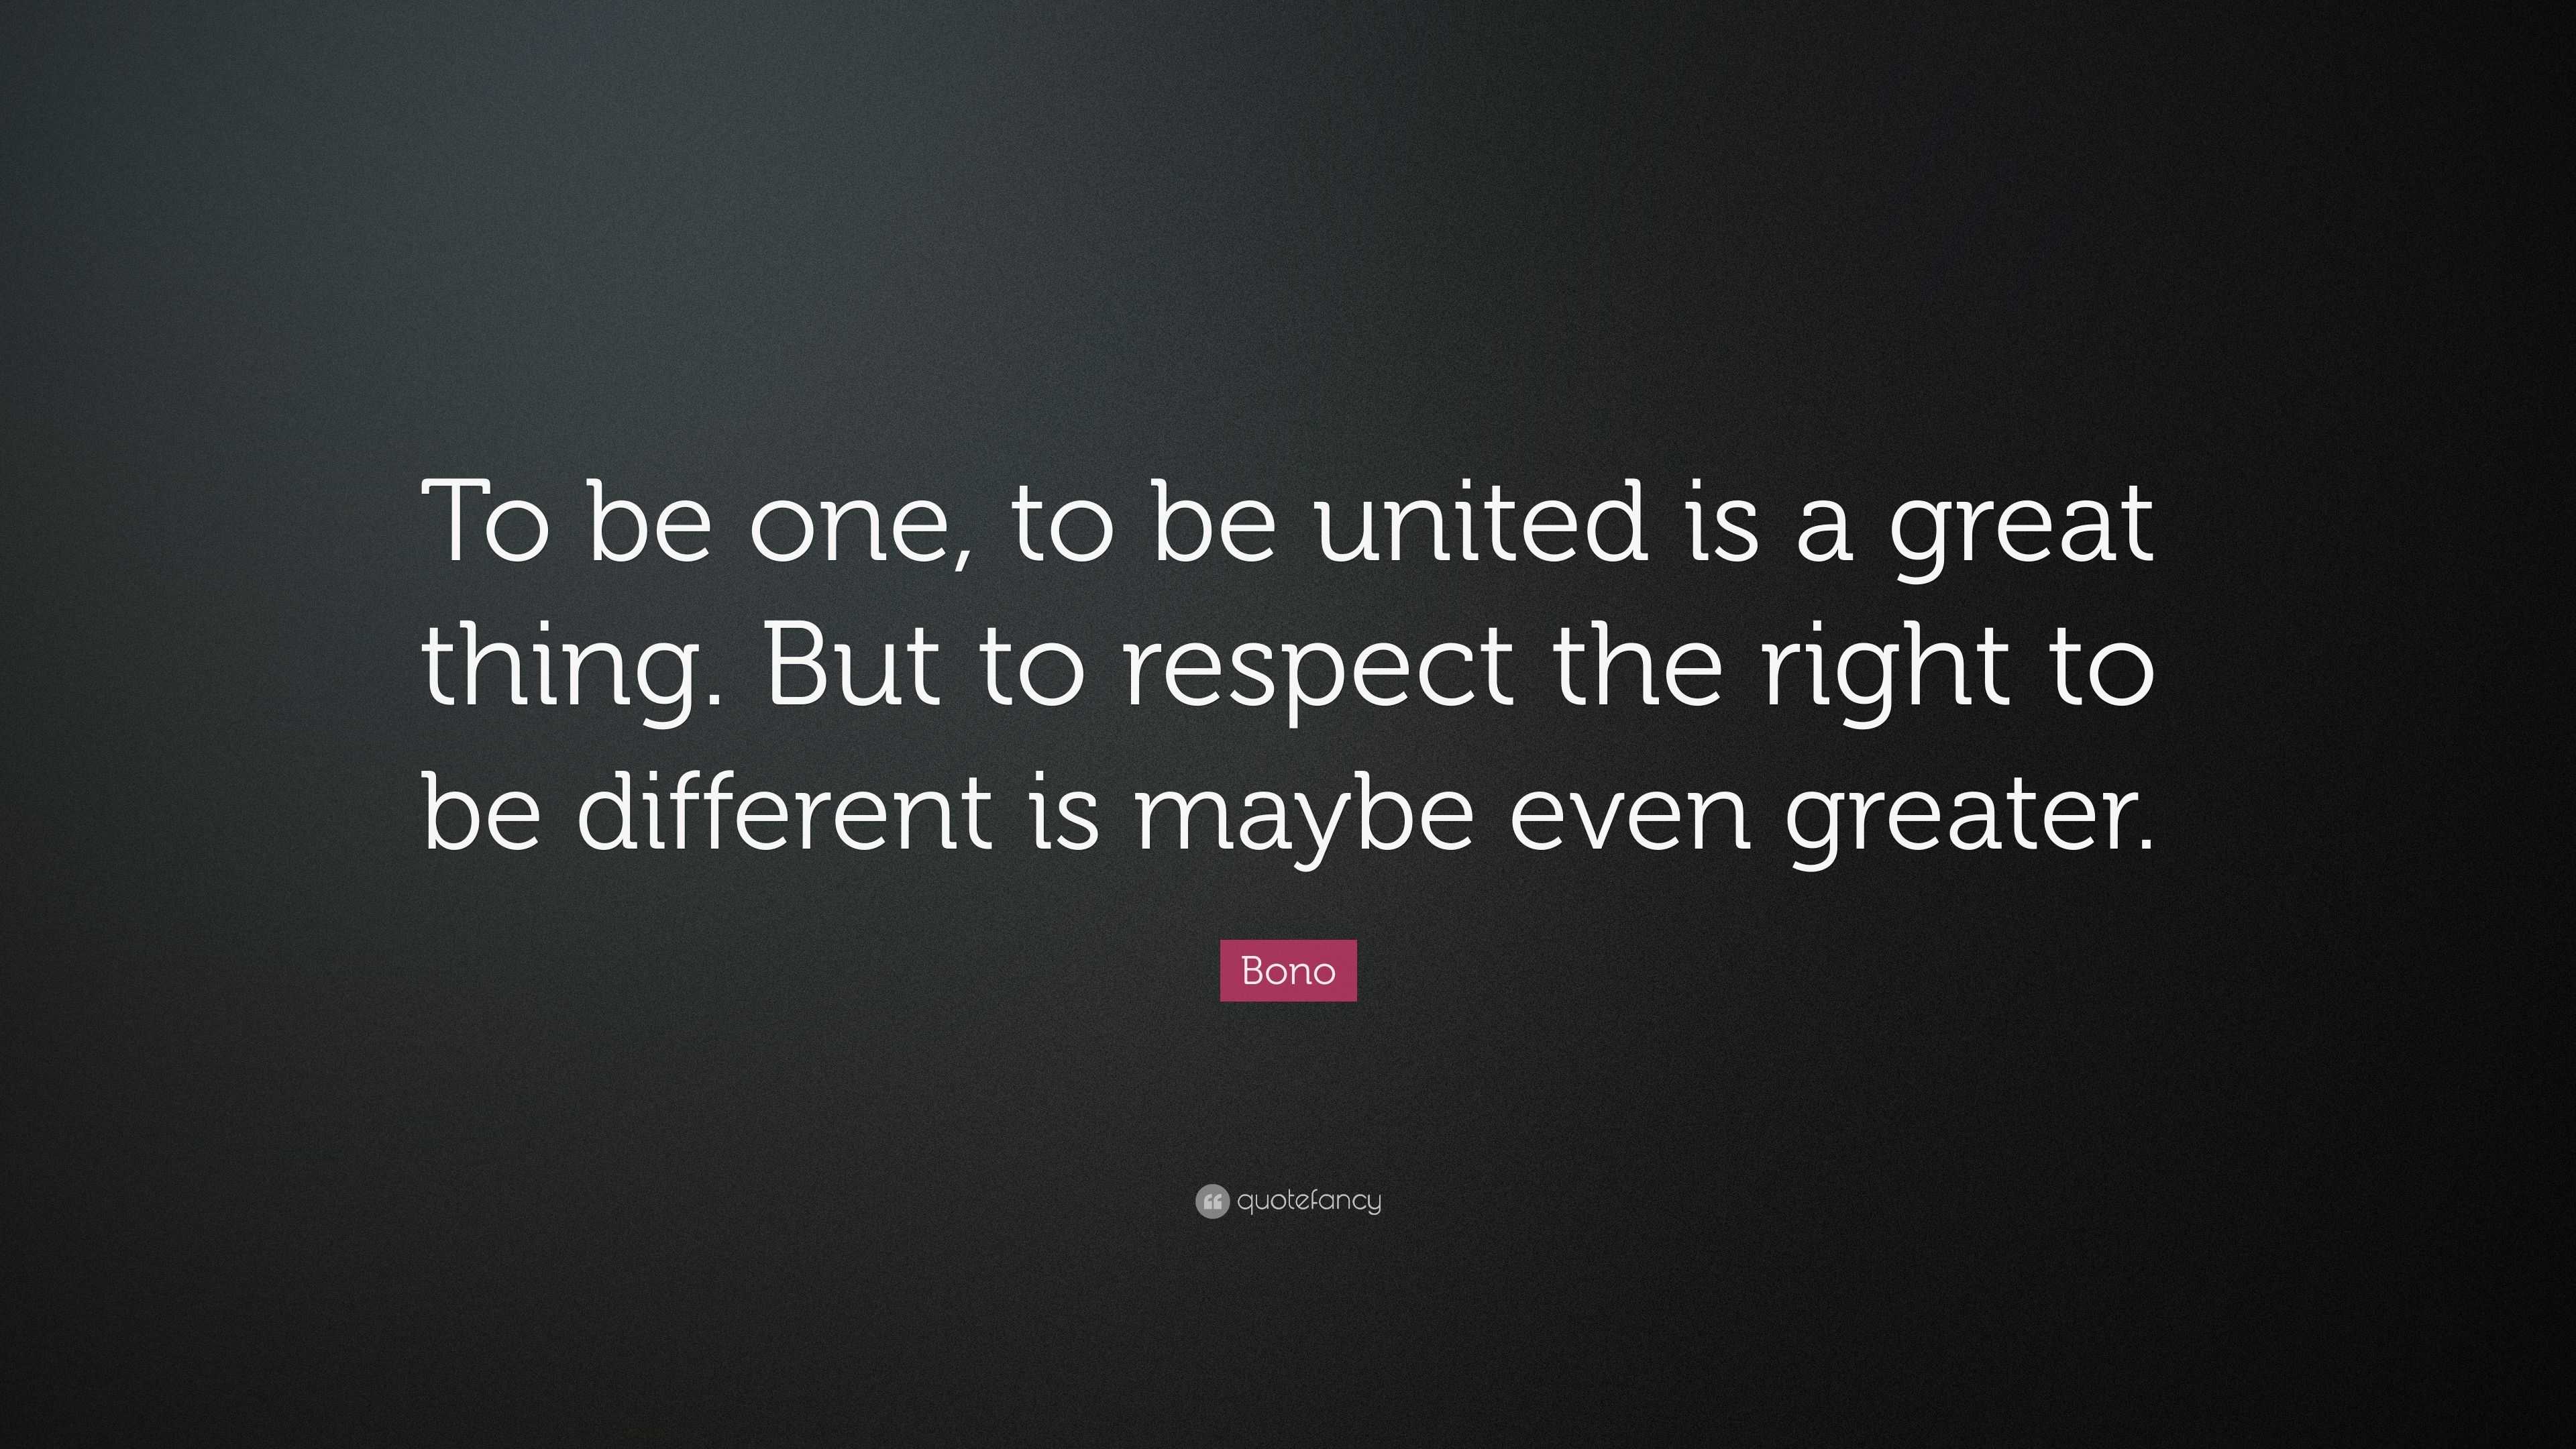 Bono Quote To Be One To Be United Is A Great Thing But To Respect The Right To Be Different Is Maybe Even Greater 12 Wallpapers Quotefancy